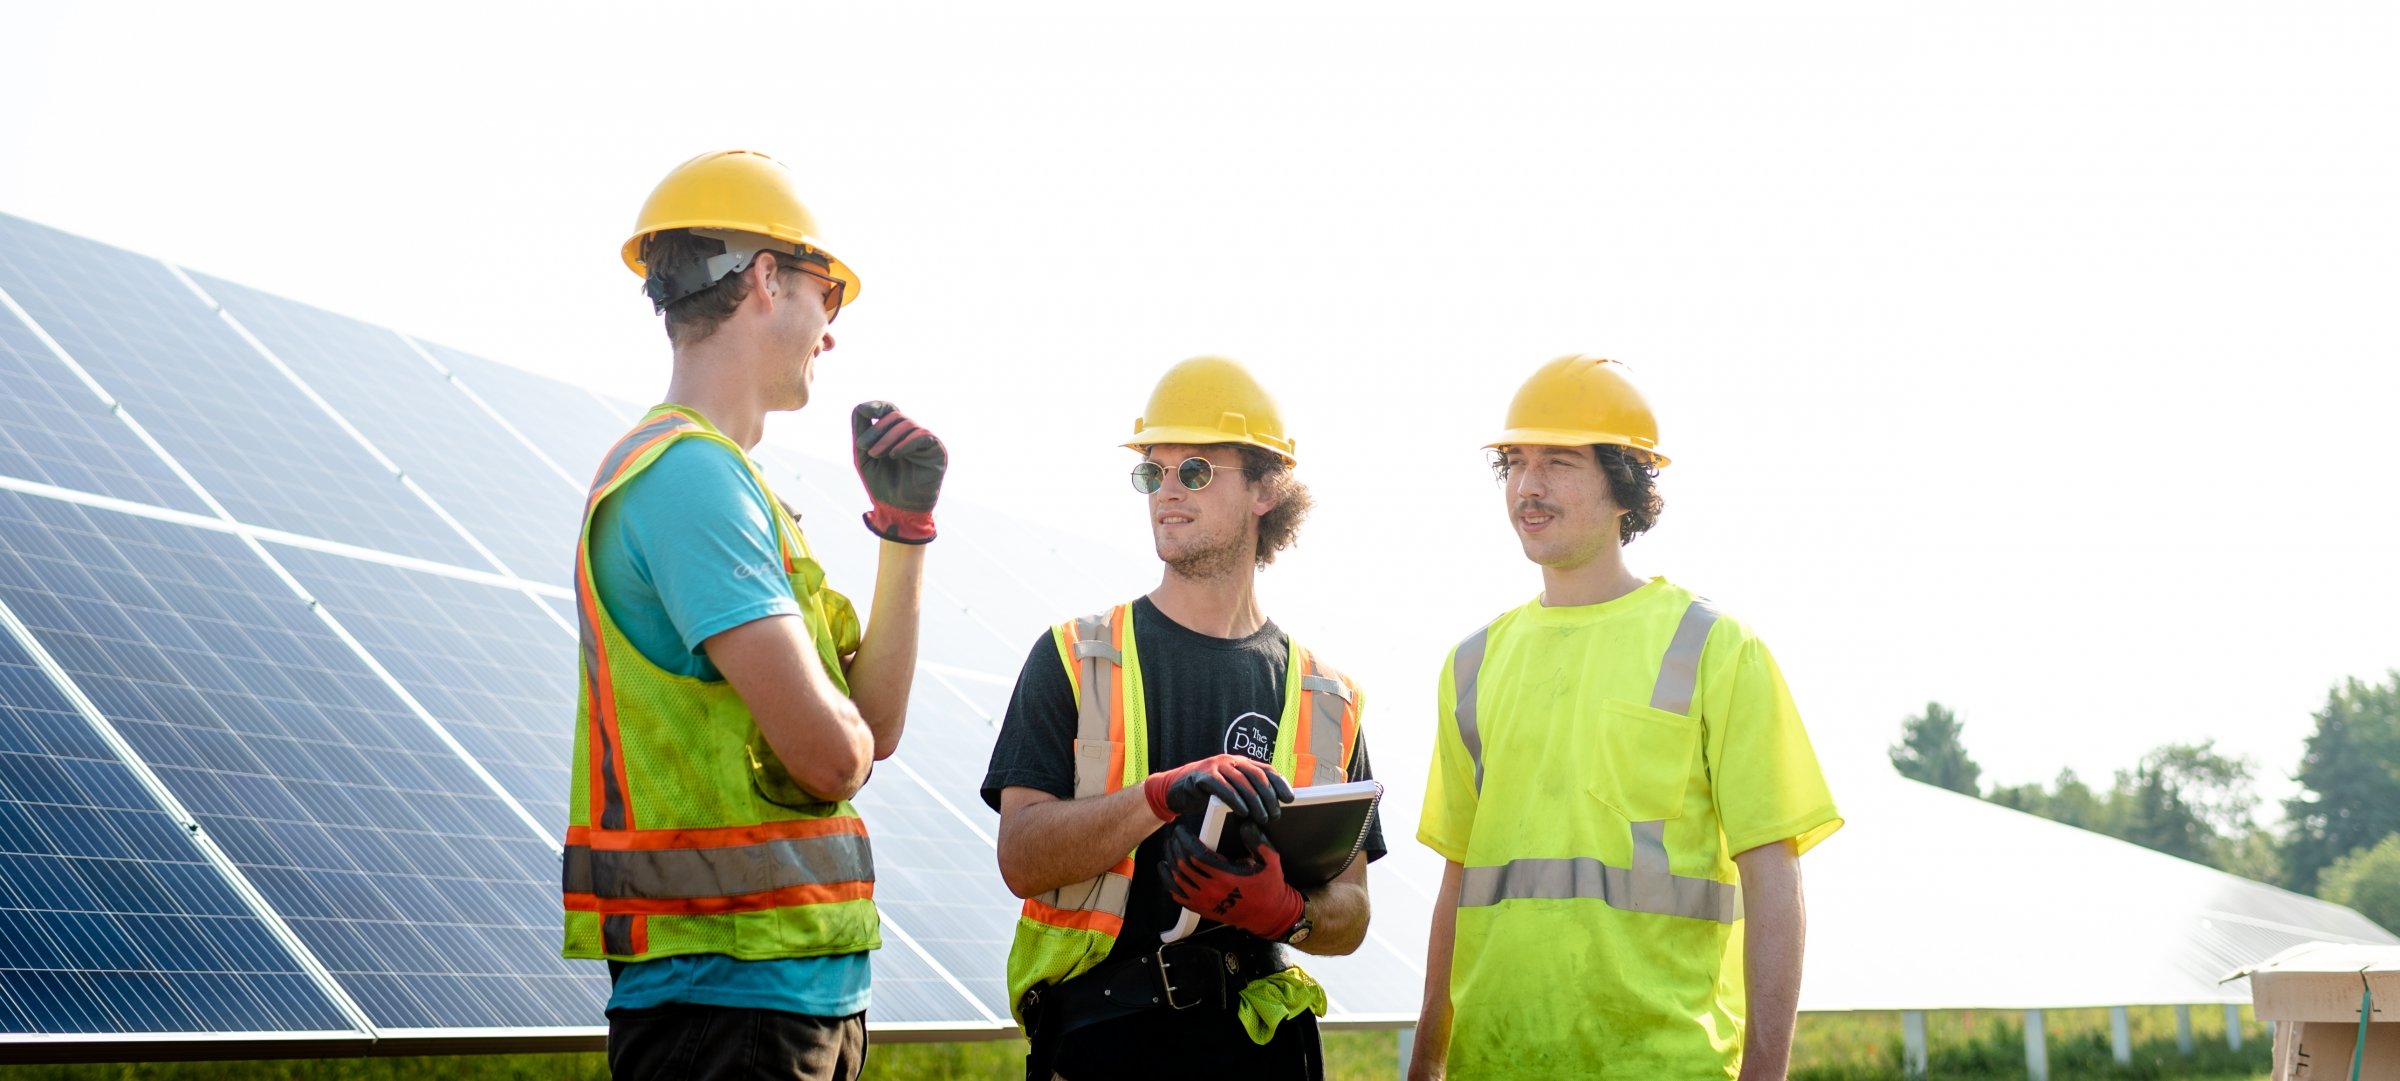 Students in hard hats at a construction site.